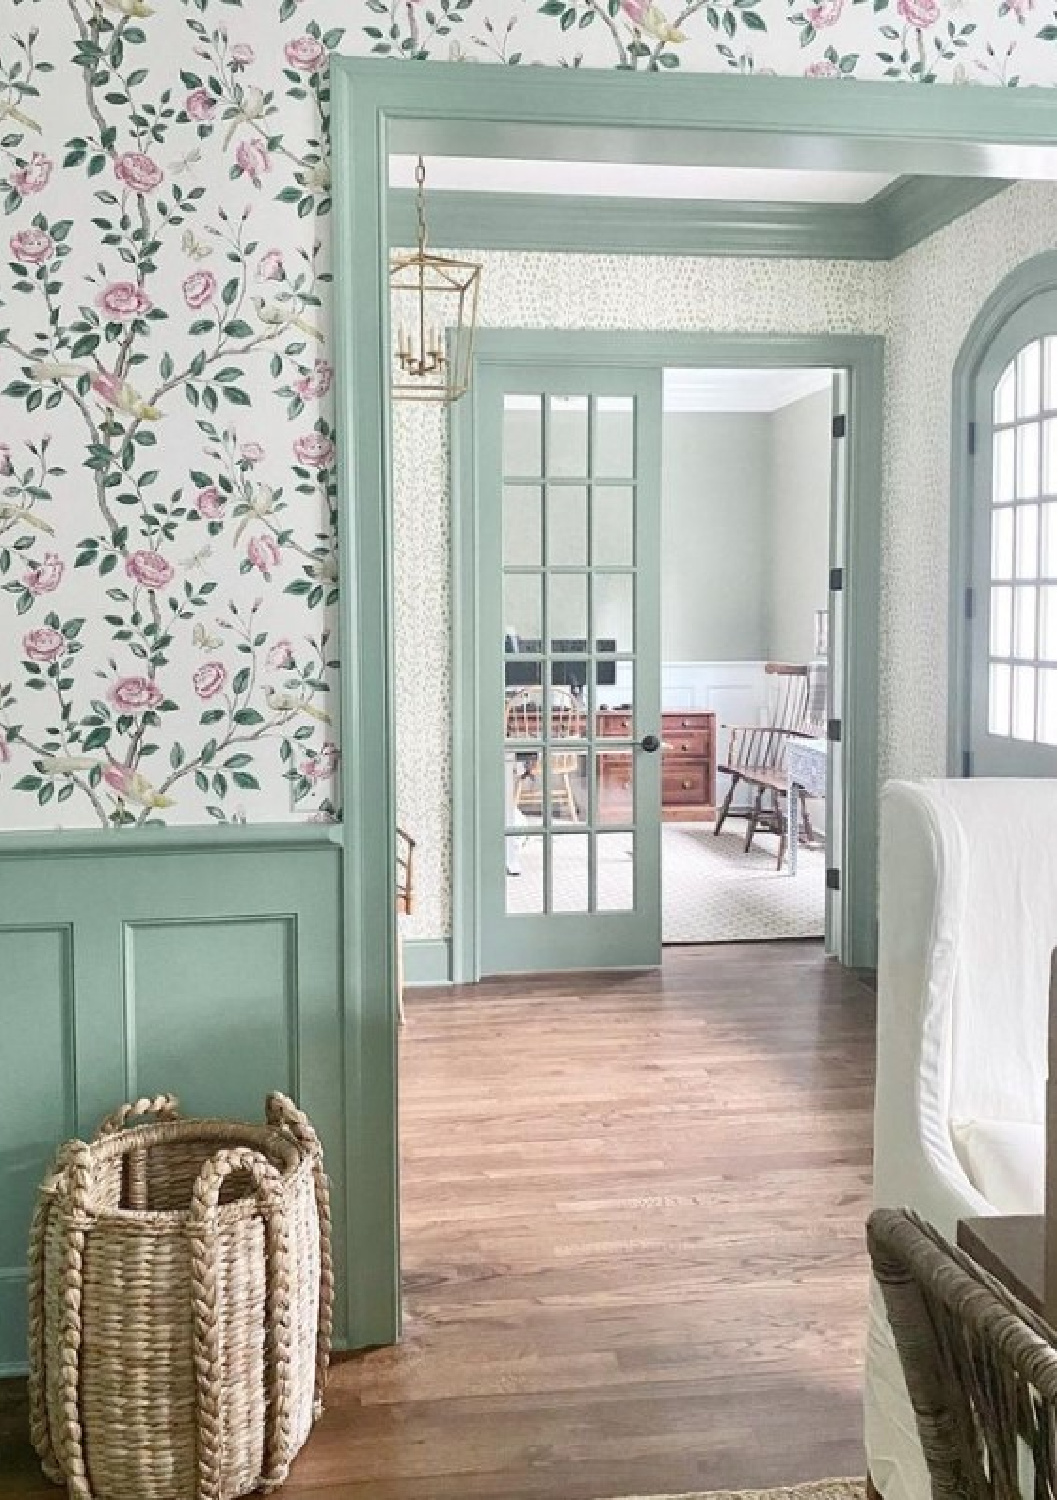 Beautiful renovated entryway with arched door and trim painted Breakfast Room Green by Farrow & Ball. Wallpaper is Brunschwig & Fils Les Touches Peridot - @dianarosespier. #breakfastroomgreen